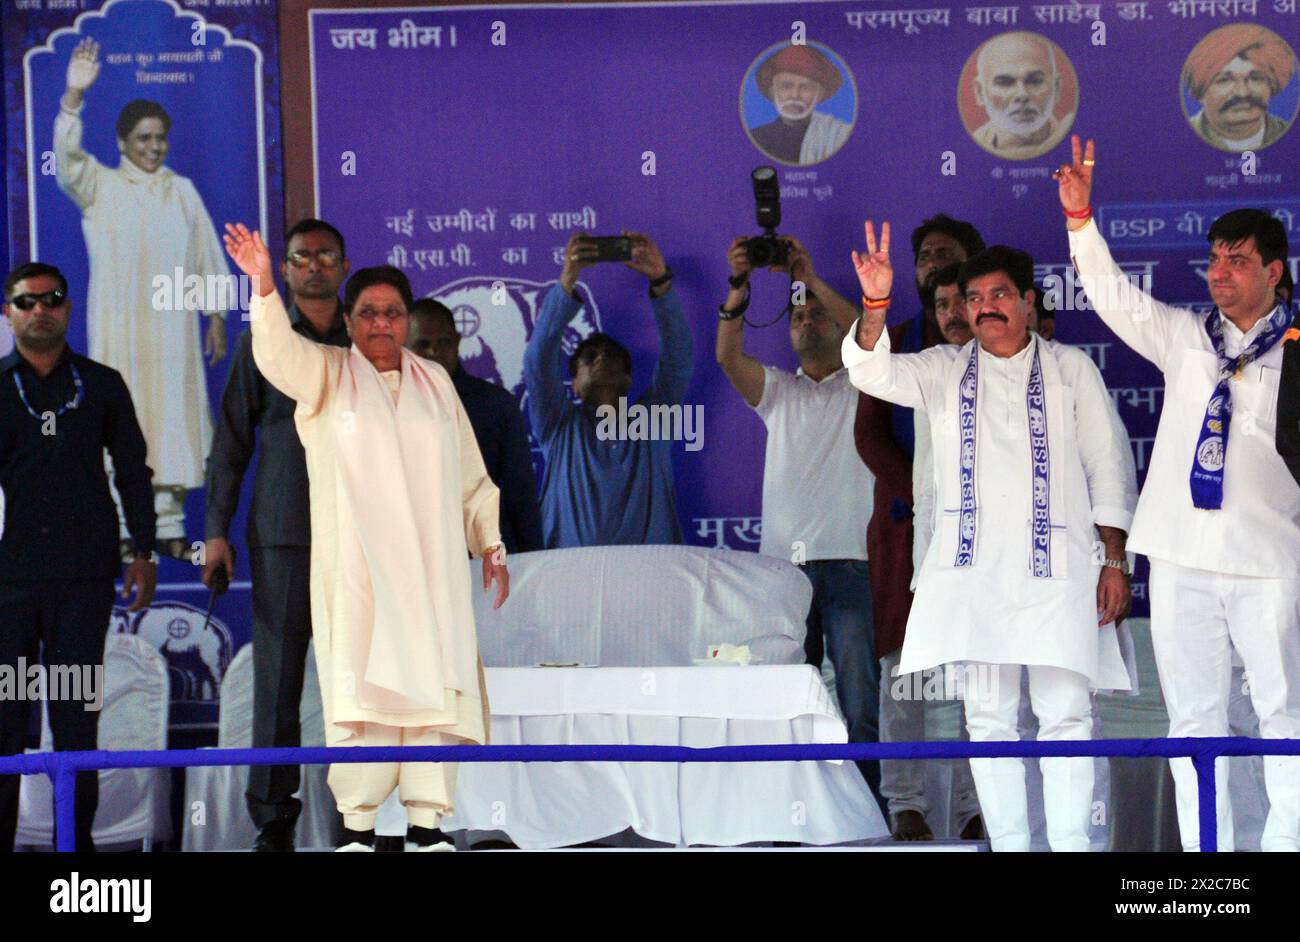 GHAZIABAD, INDIA - APRIL 21: Bahujan Samaj Party's national president Mayawati greeting the people after addressing an election rally at Kavi Nagar Ramlila Ground, on April 21, 2024 in Ghaziabad, India. She said that if electronic voting machines (EVMs) are not tampered with, it will be 'difficult' for the ruling BJP to win the Lok Sabha polls this time. She also hit out at the BJP, saying 'due to the casteist, capitalist and communal policies of the BJP', the party will have to face a tough fight in this parliamentary election. (Photo by Sakib Ali/Hindustan Times/Sipa USA ) Stock Photo